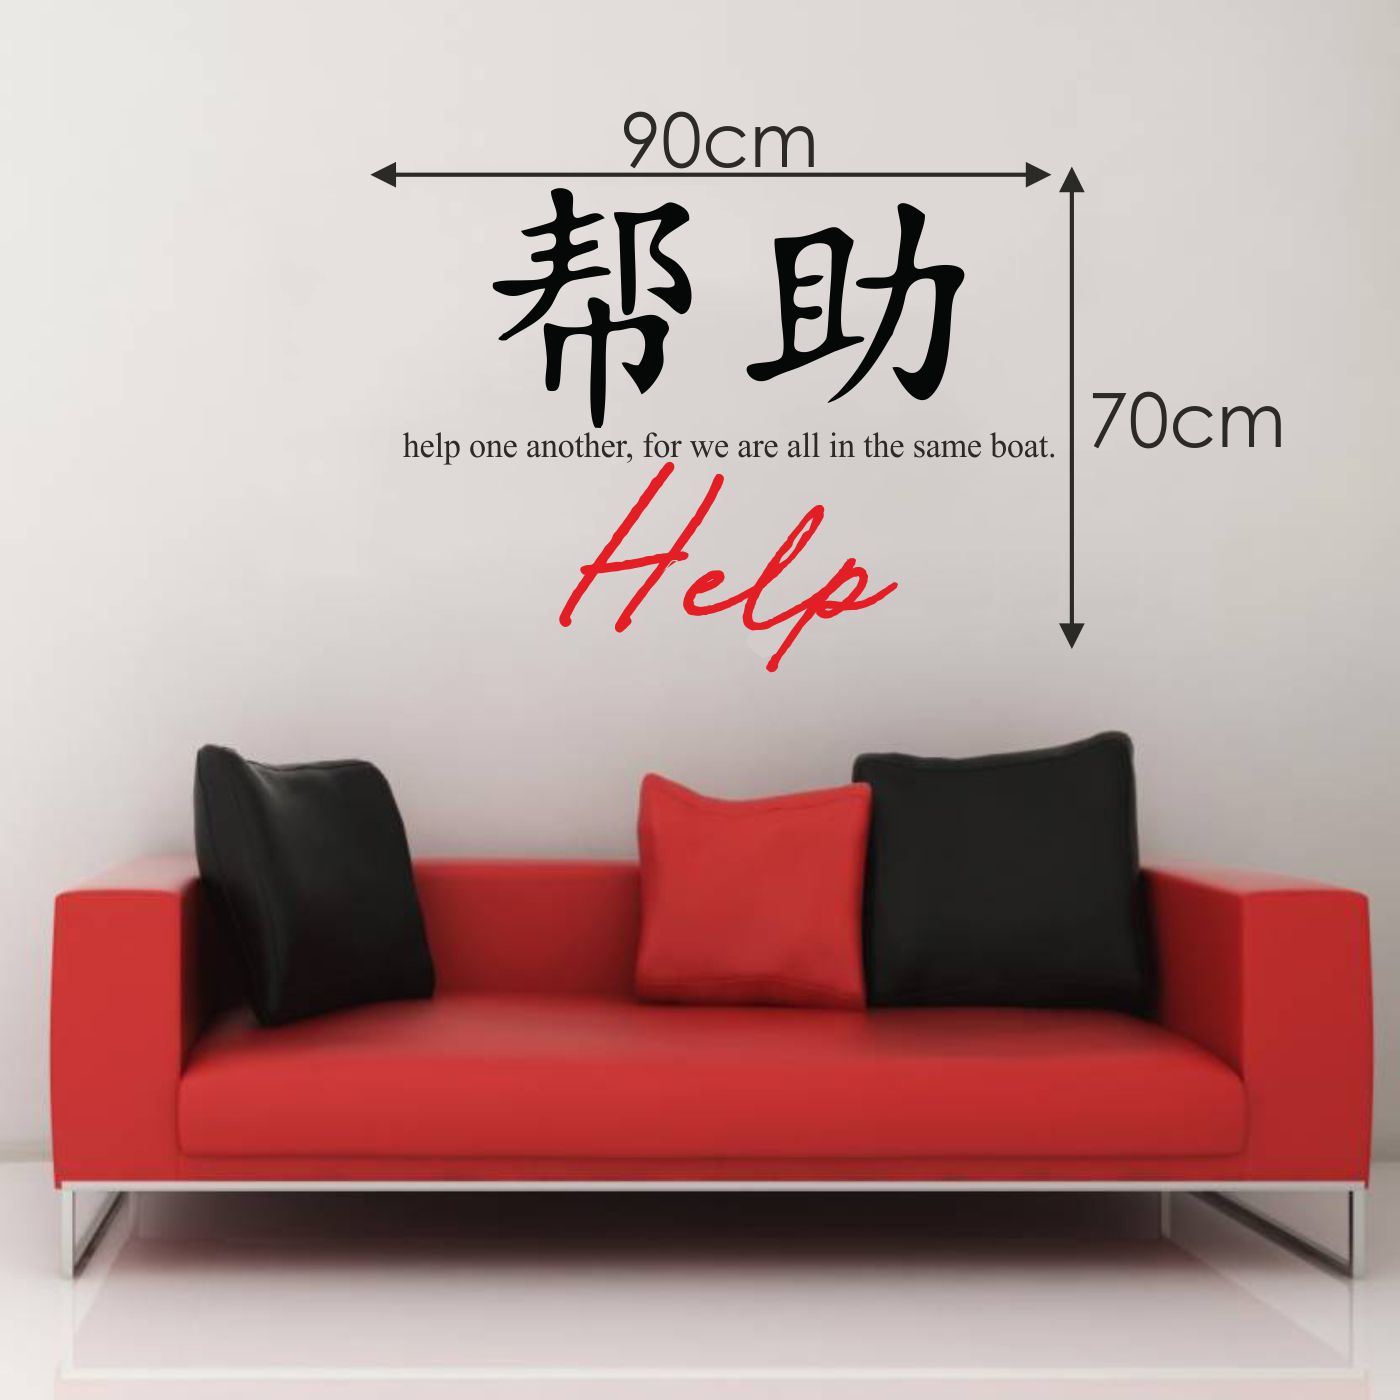 ORKA Chinese Wall Decal Sticker 15  